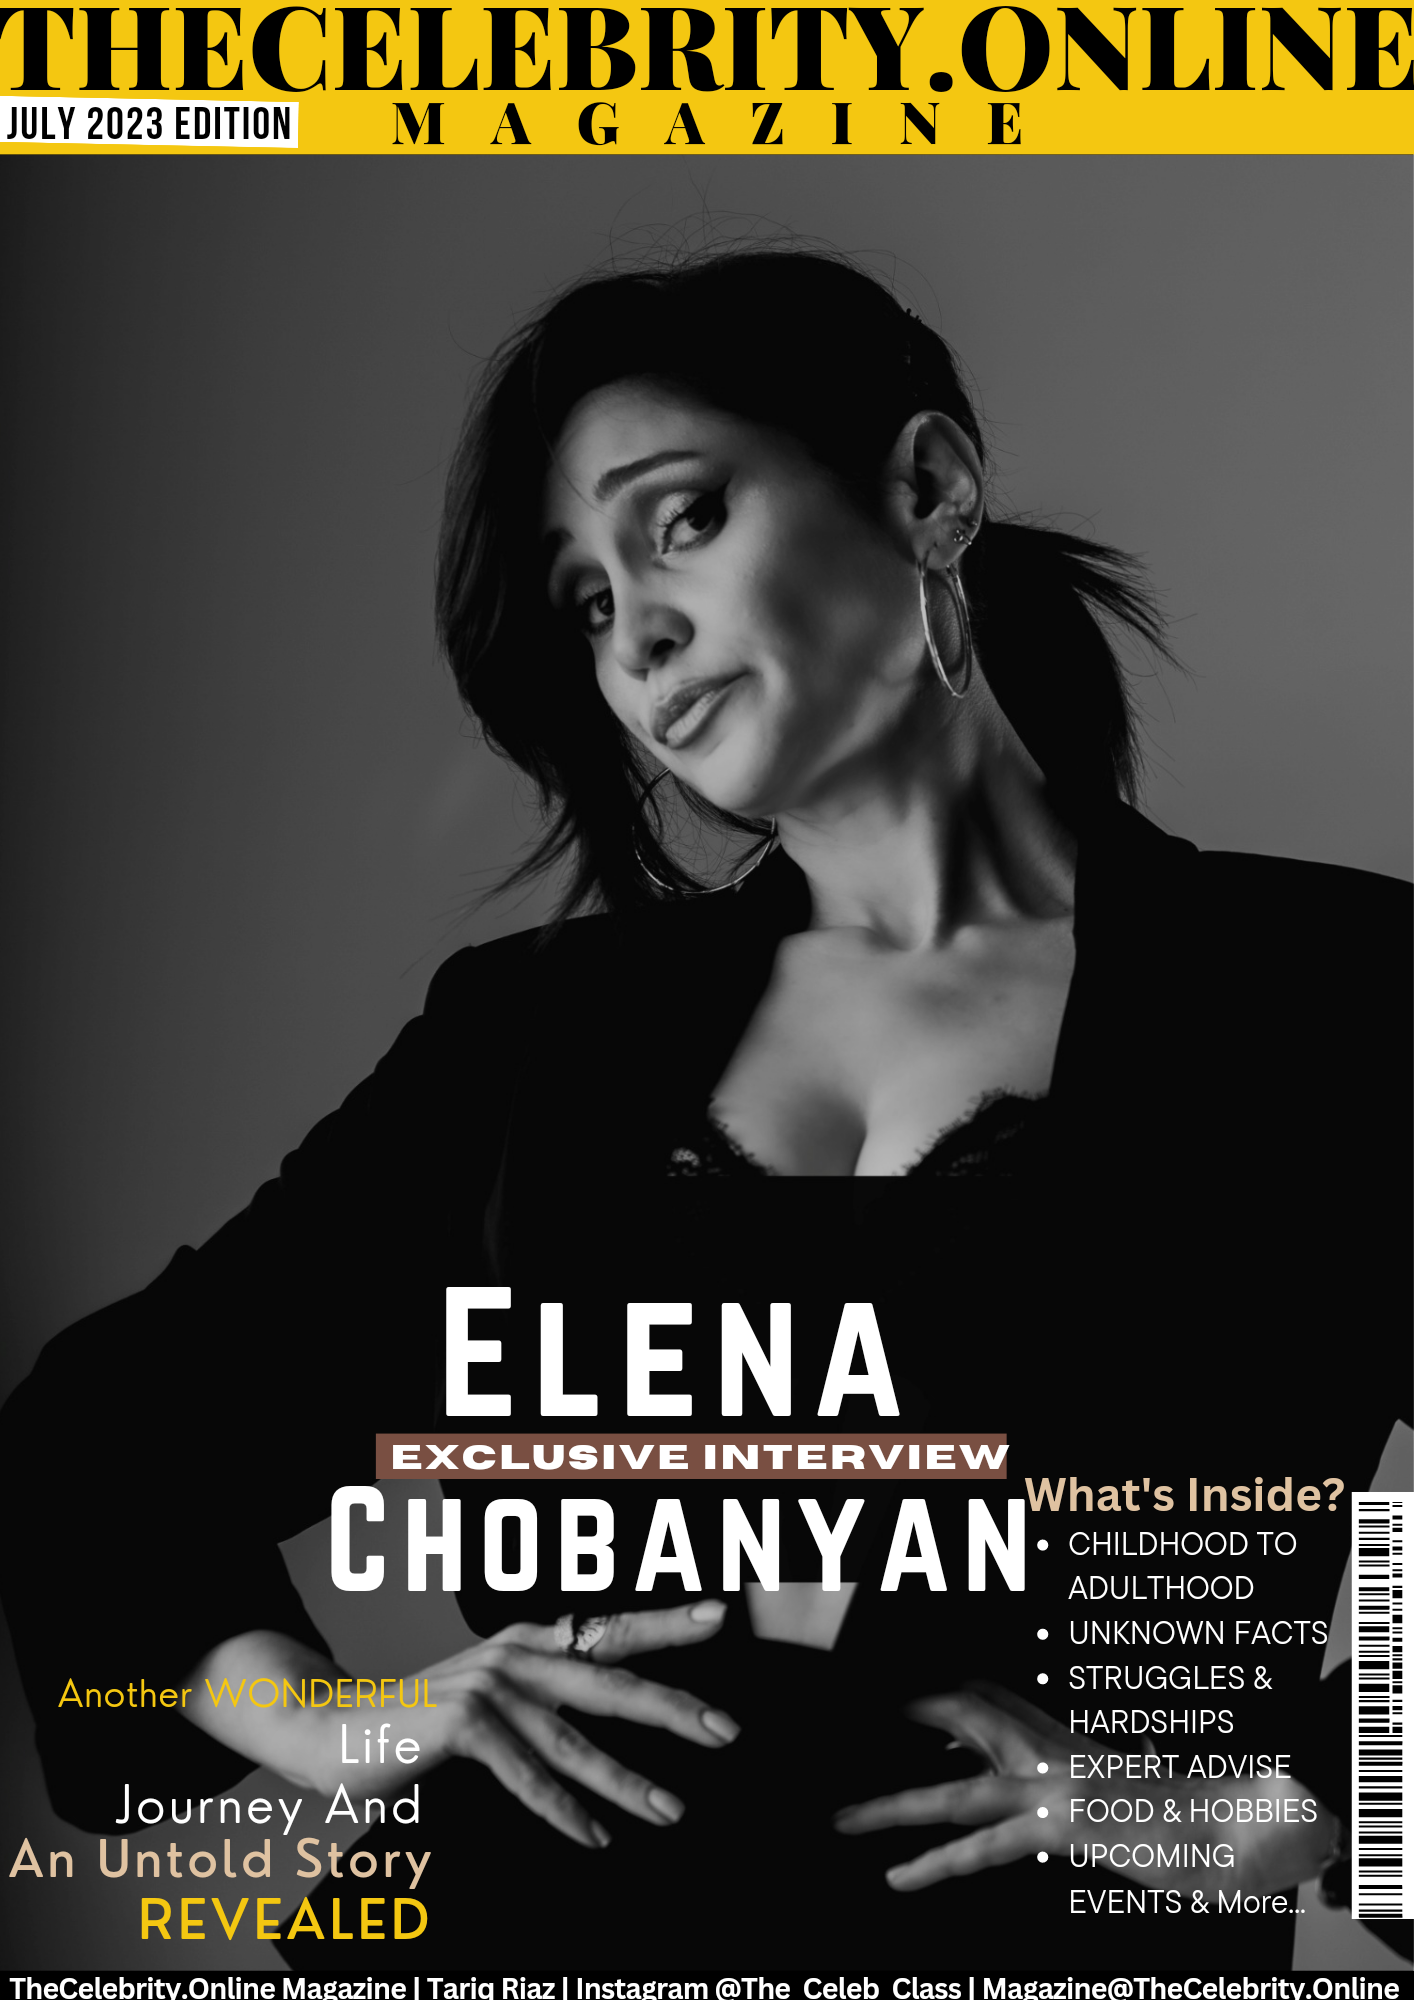 Elena Chobanyan Exclusive Interview – ‘Go For Your Dreams, Since Life Is Once’